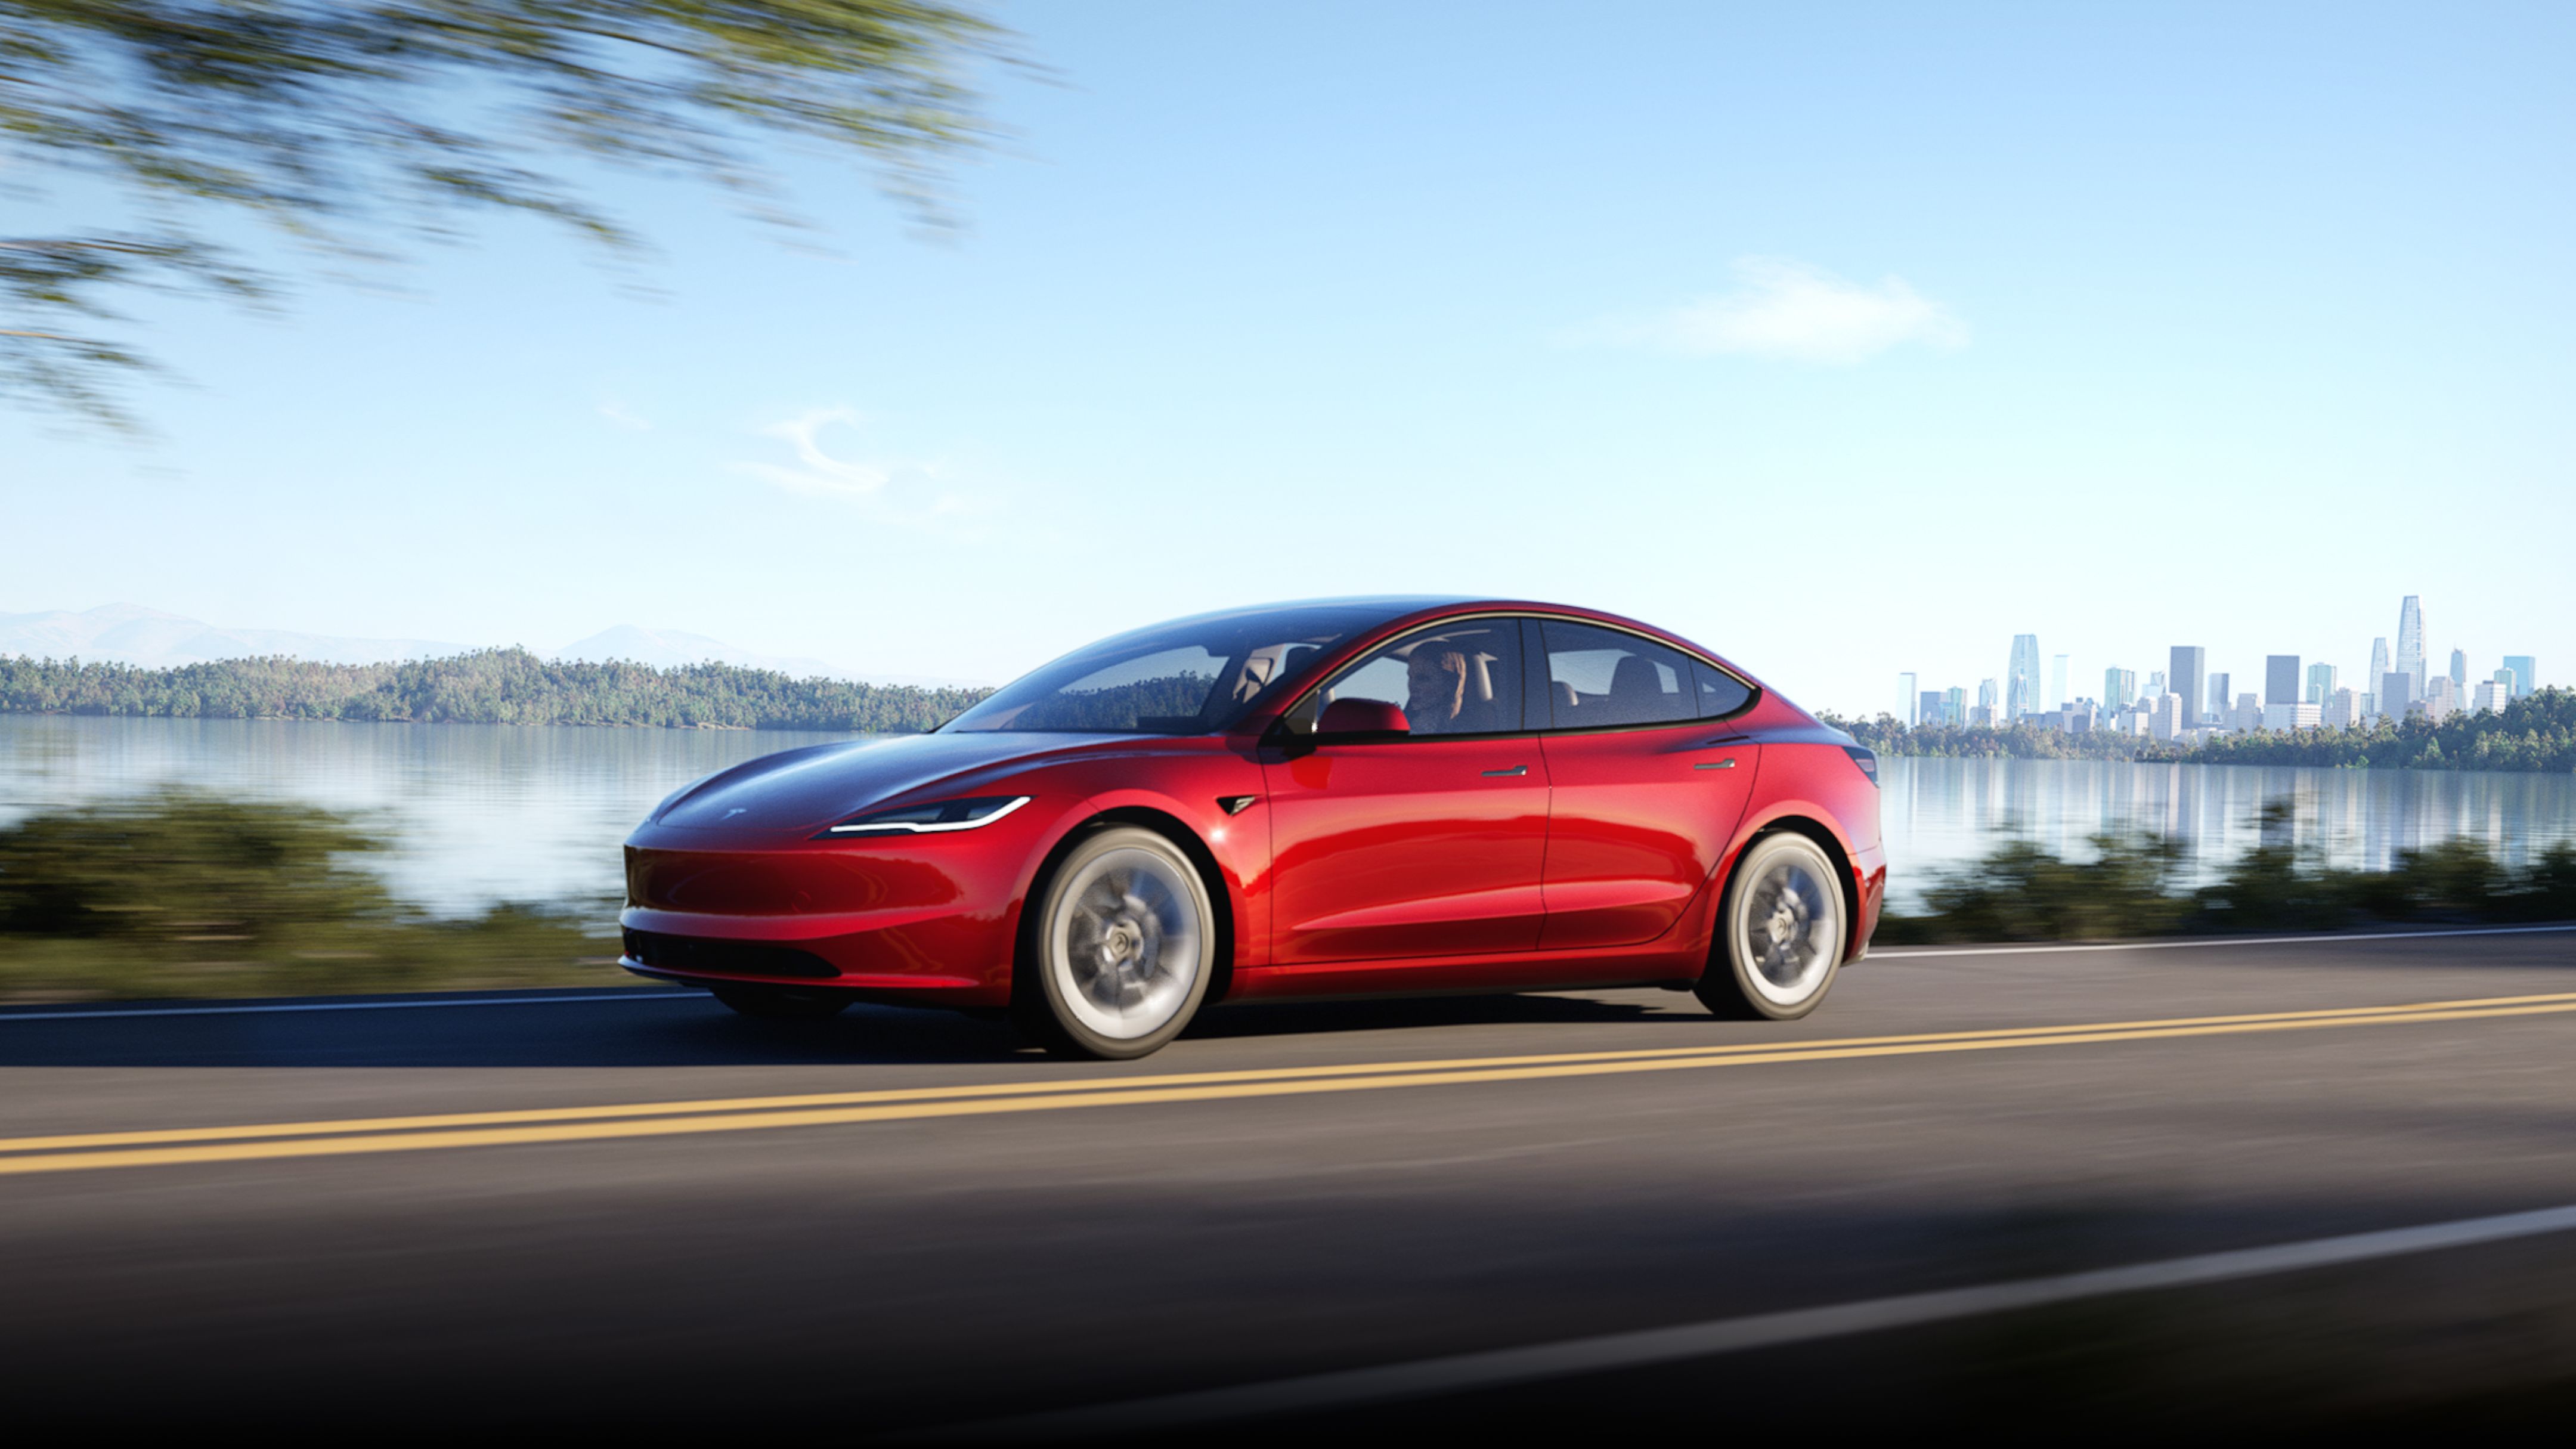 I drove the new Tesla Model 3, here's what got better